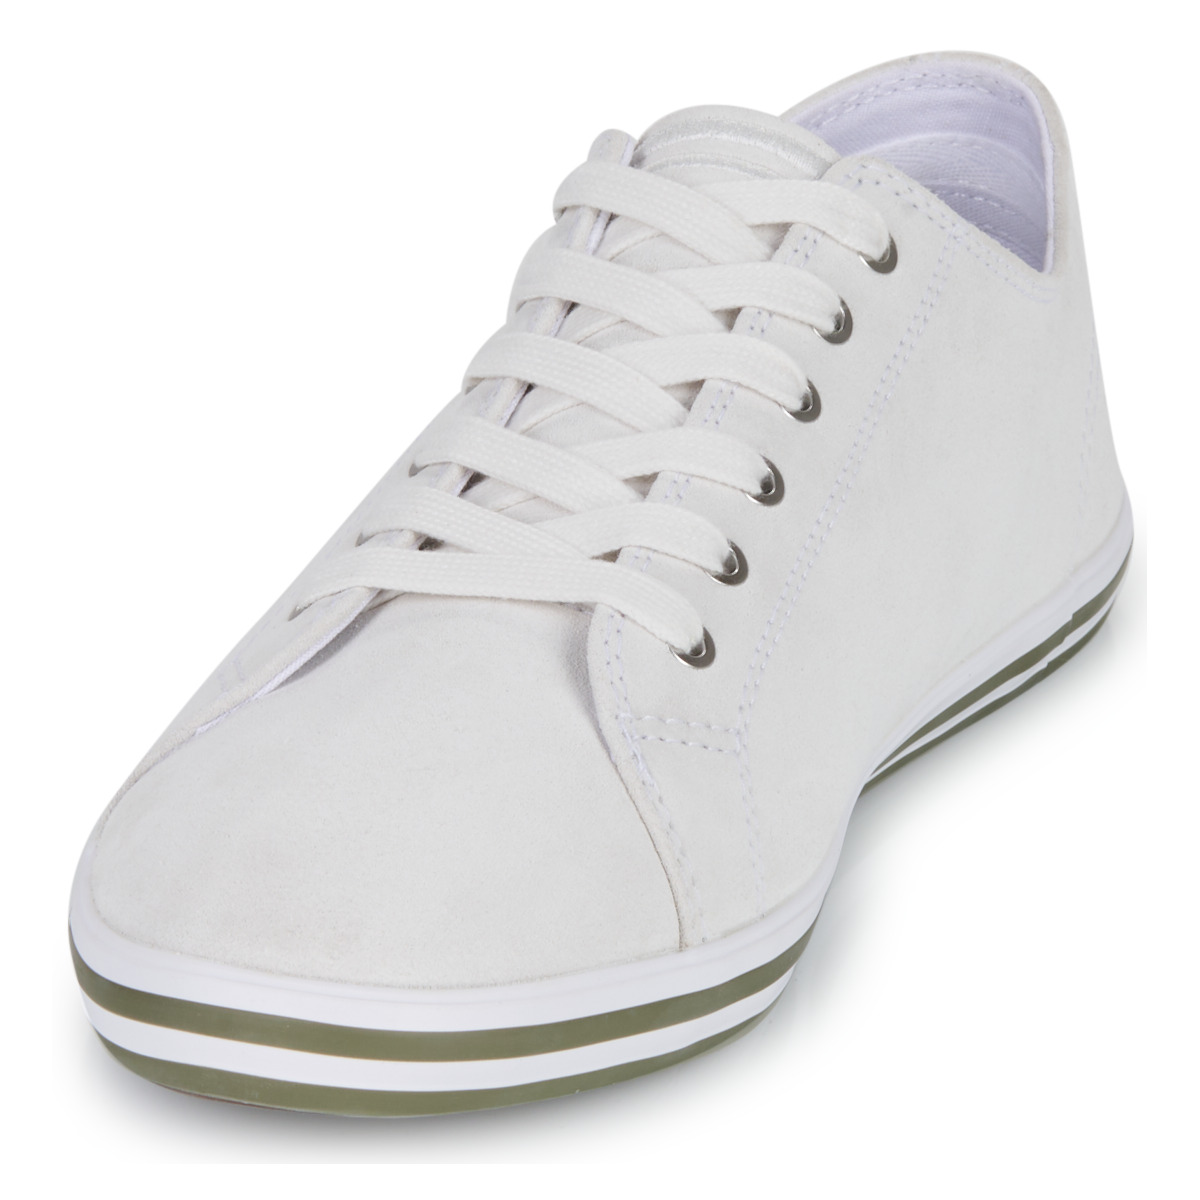 Fred Perry Blanc / Vert KINGSTON SUEDE i6ETAUw3